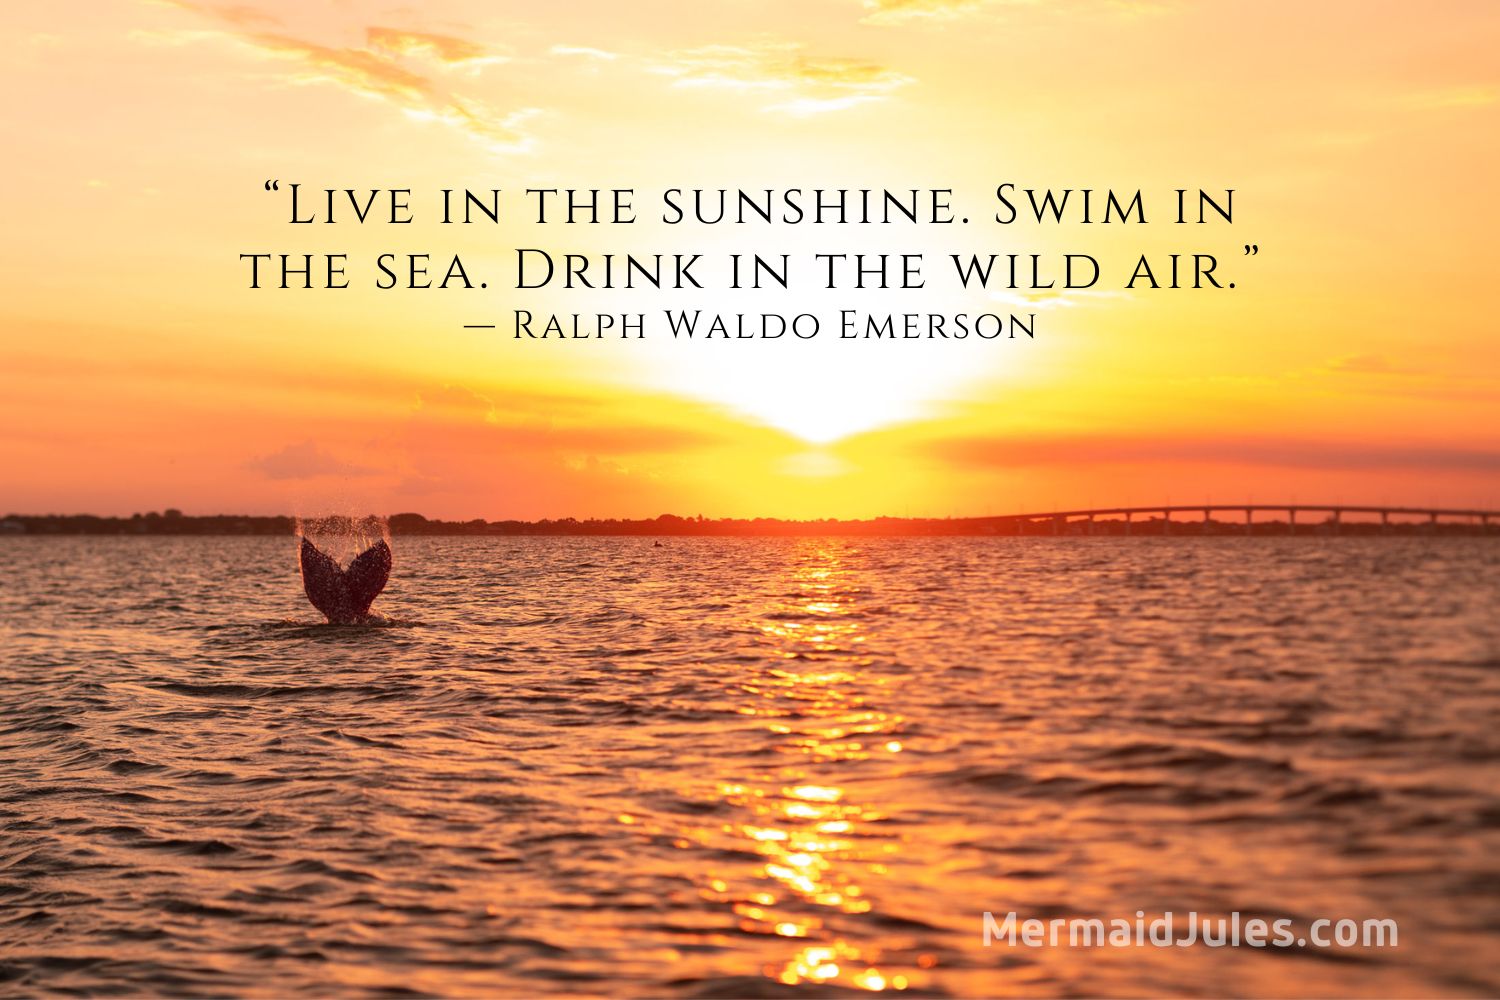 Live in the sunshine. Swim in the sea. Drink the wild air. - Ralph Waldo Emerson, Mermaid Jules quotes